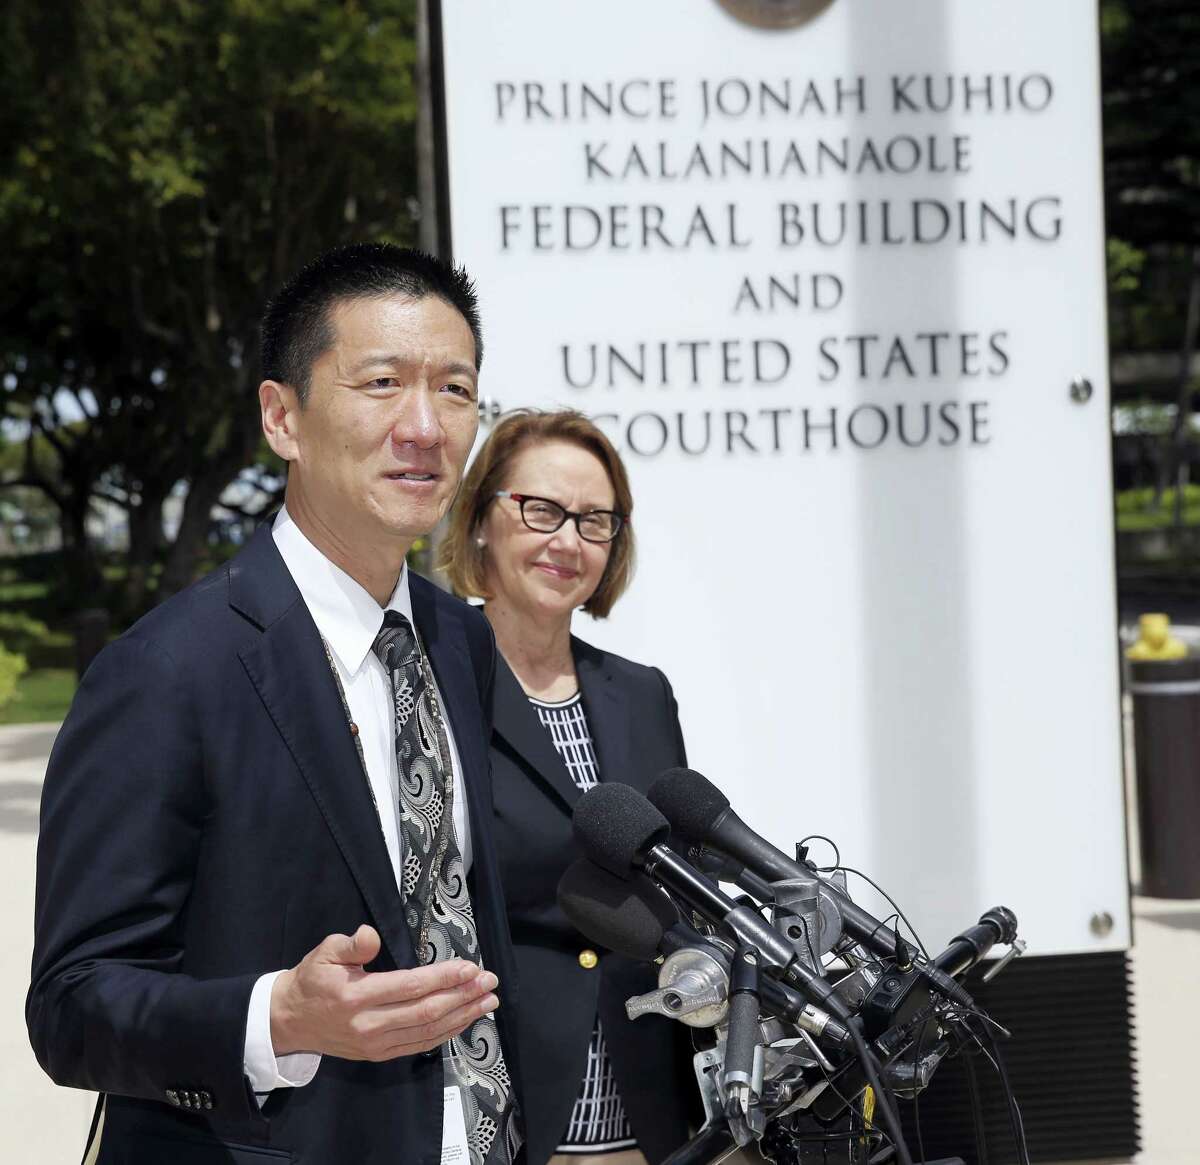 Hawaii Attorney General Douglas Chin, left, and Oregon Attorney General Ellen Rosenblum speak at a press conference outside the federal courthouse, Wednesday, March 15, 2107, in Honolulu. Hearings were scheduled Wednesday in Maryland, Washington state and Hawaii on President Donald Trump’s travel ban. The lawsuit claims the ban harms Hawaii by highlighting the state’s dependence on international travelers, its ethnic diversity and its welcoming reputation as the Aloha State.